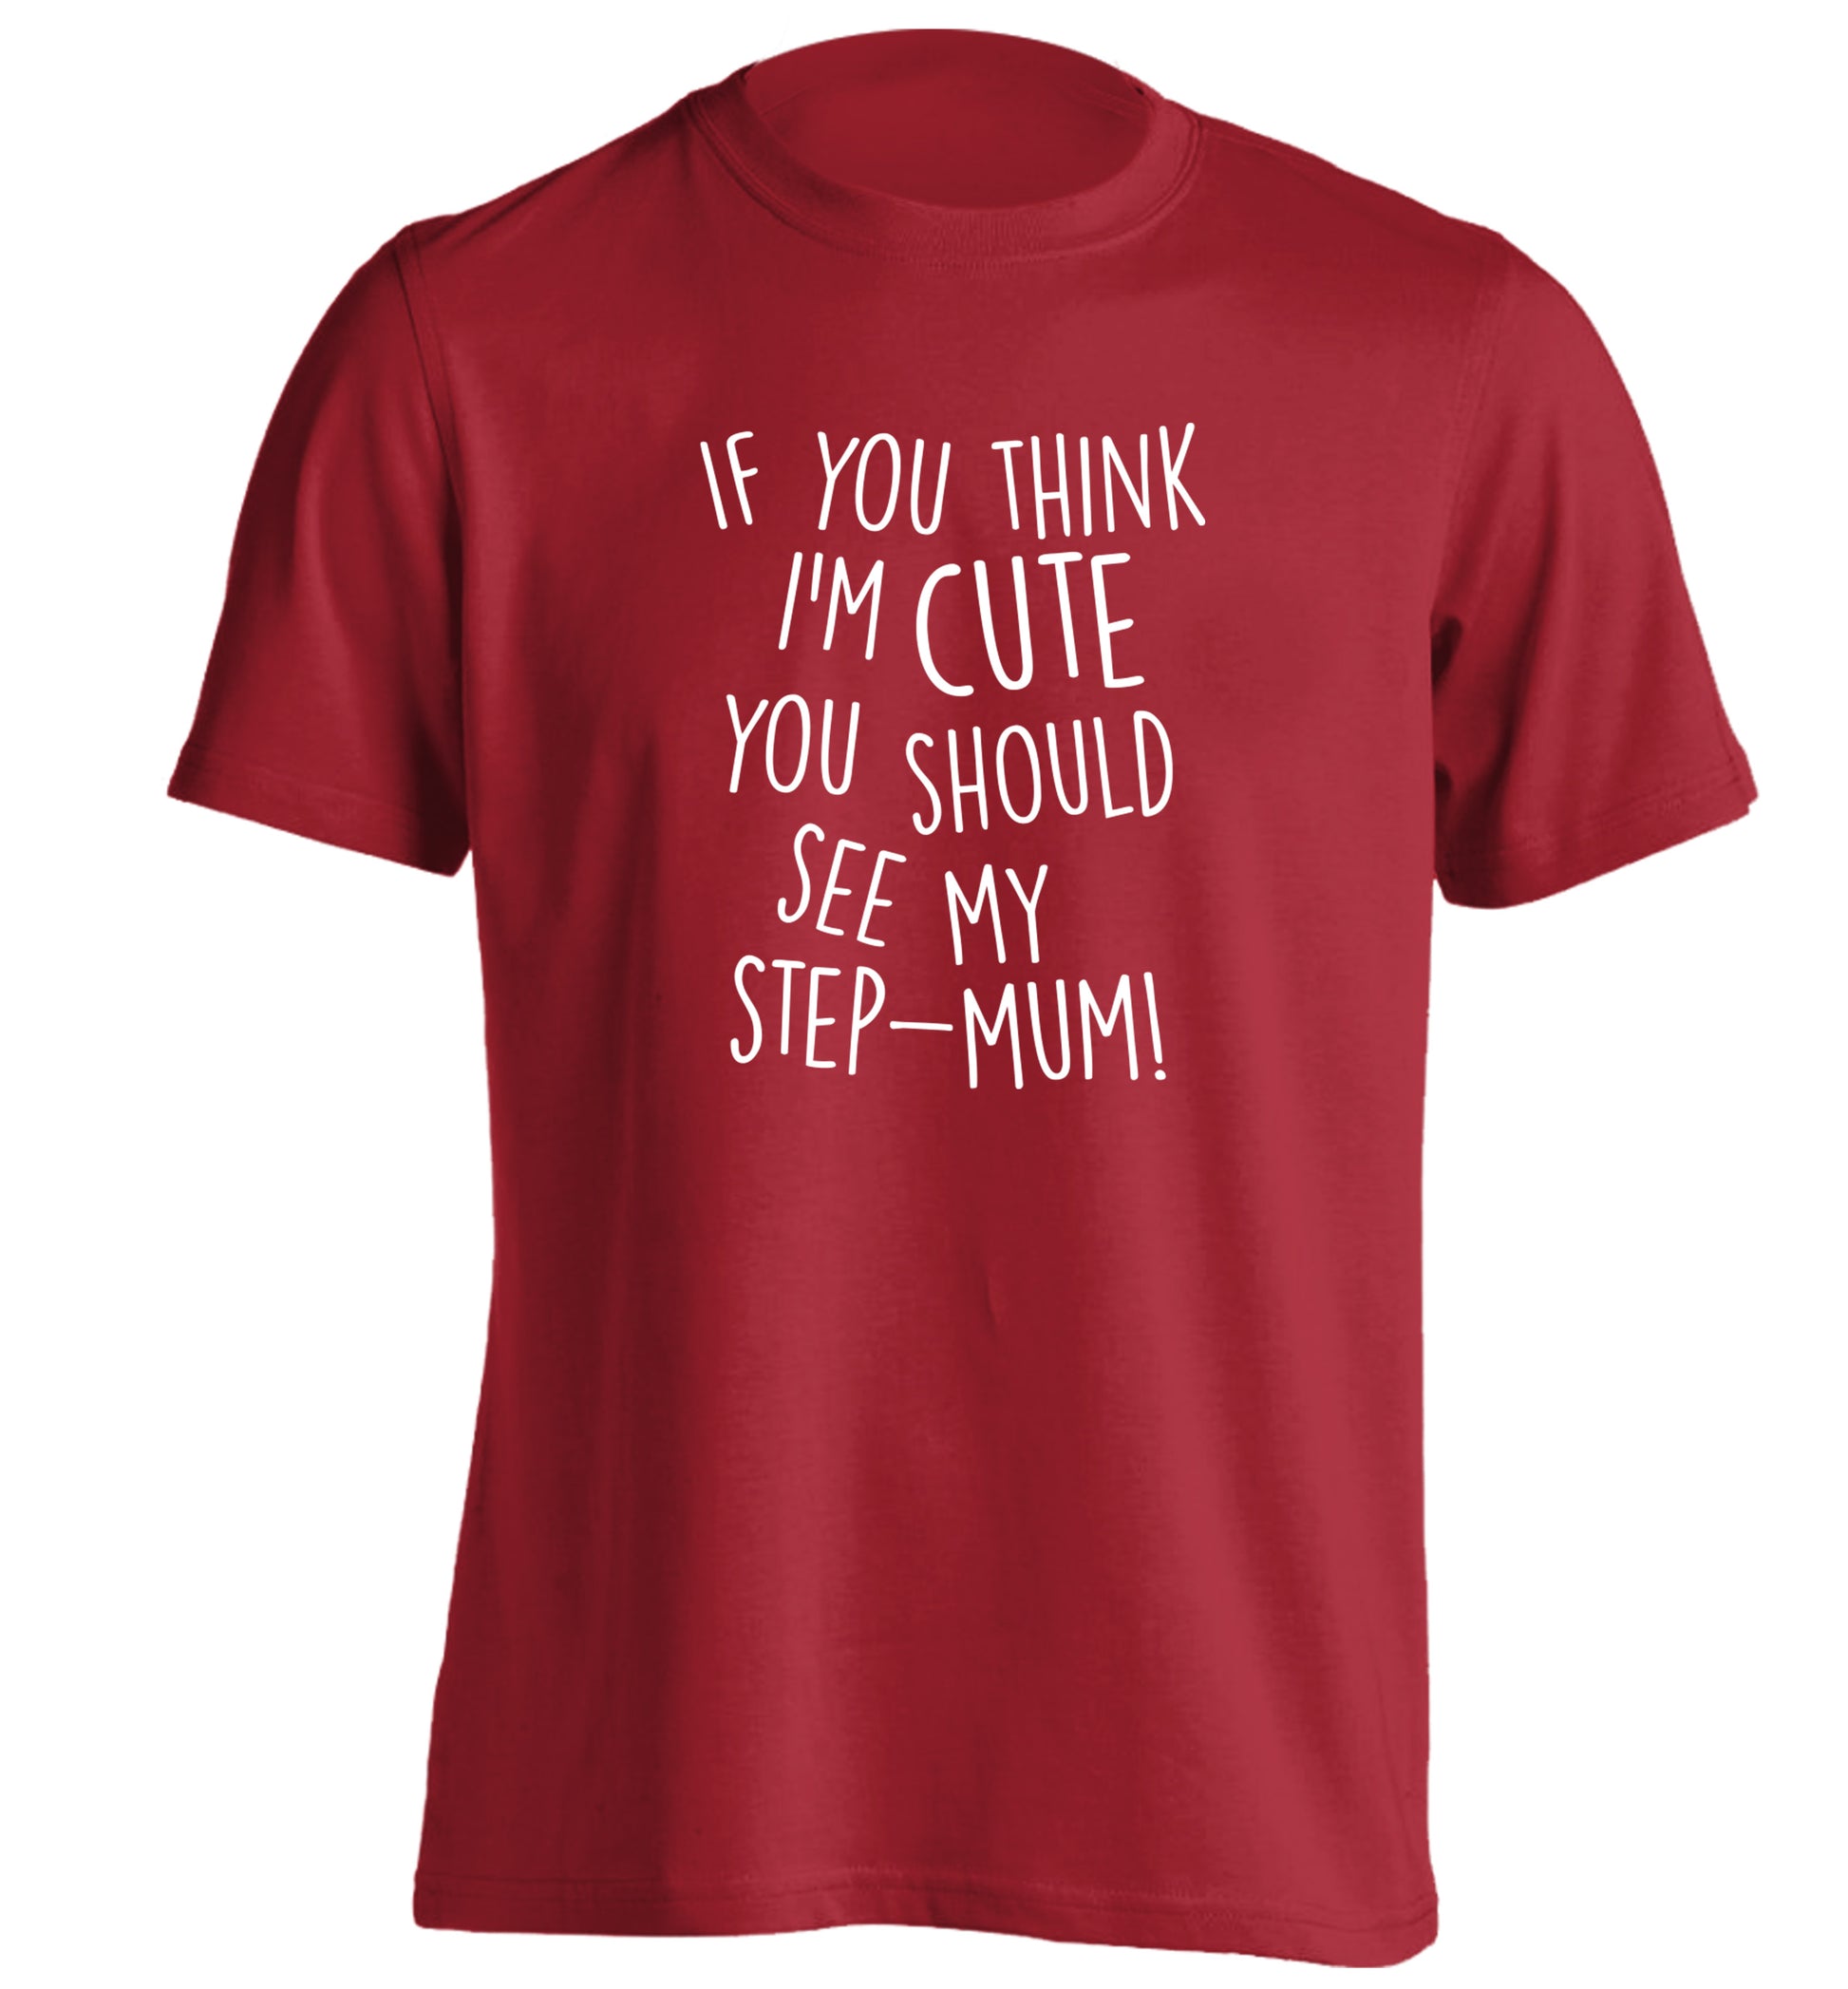 If you think I'm cute you should see my step-mum adults unisex red Tshirt 2XL